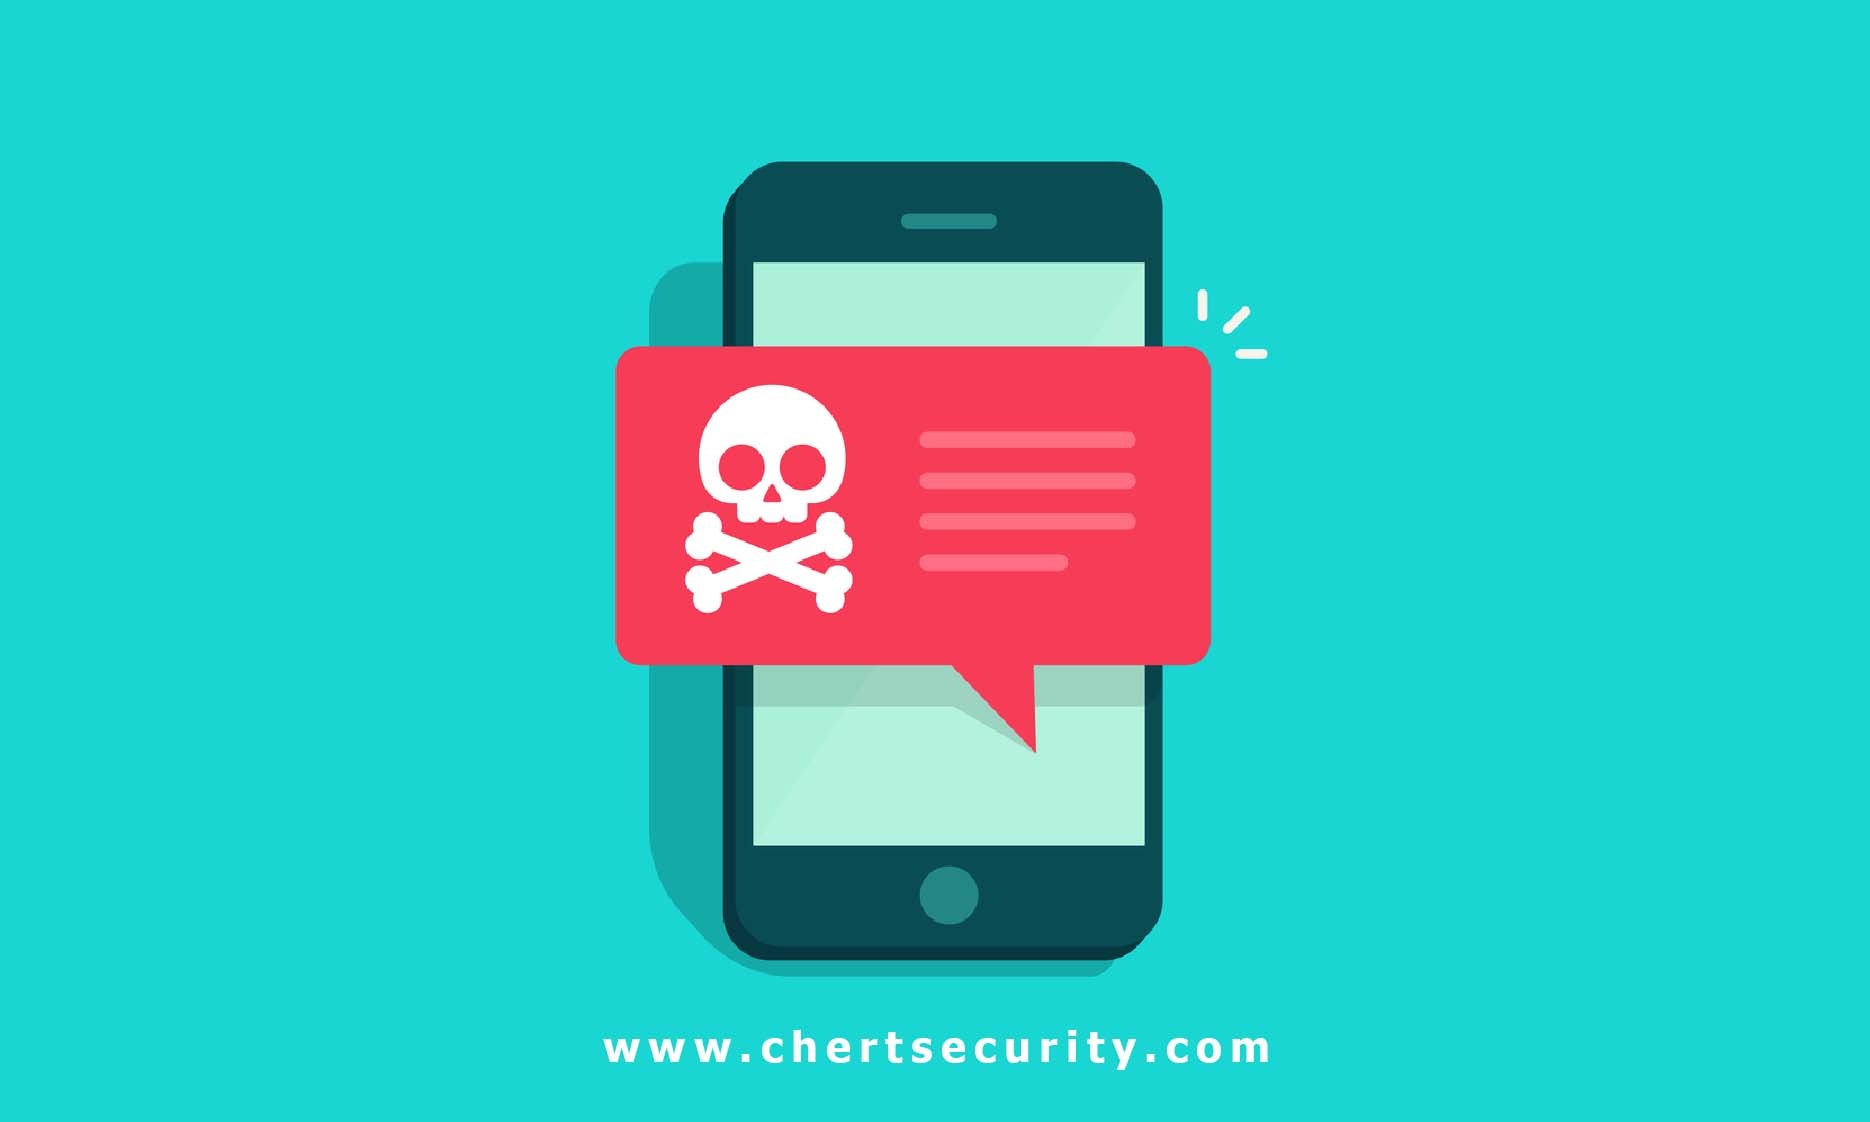 MOBILE RANSOMWARE – WHAT YOU NEED TO KNOW